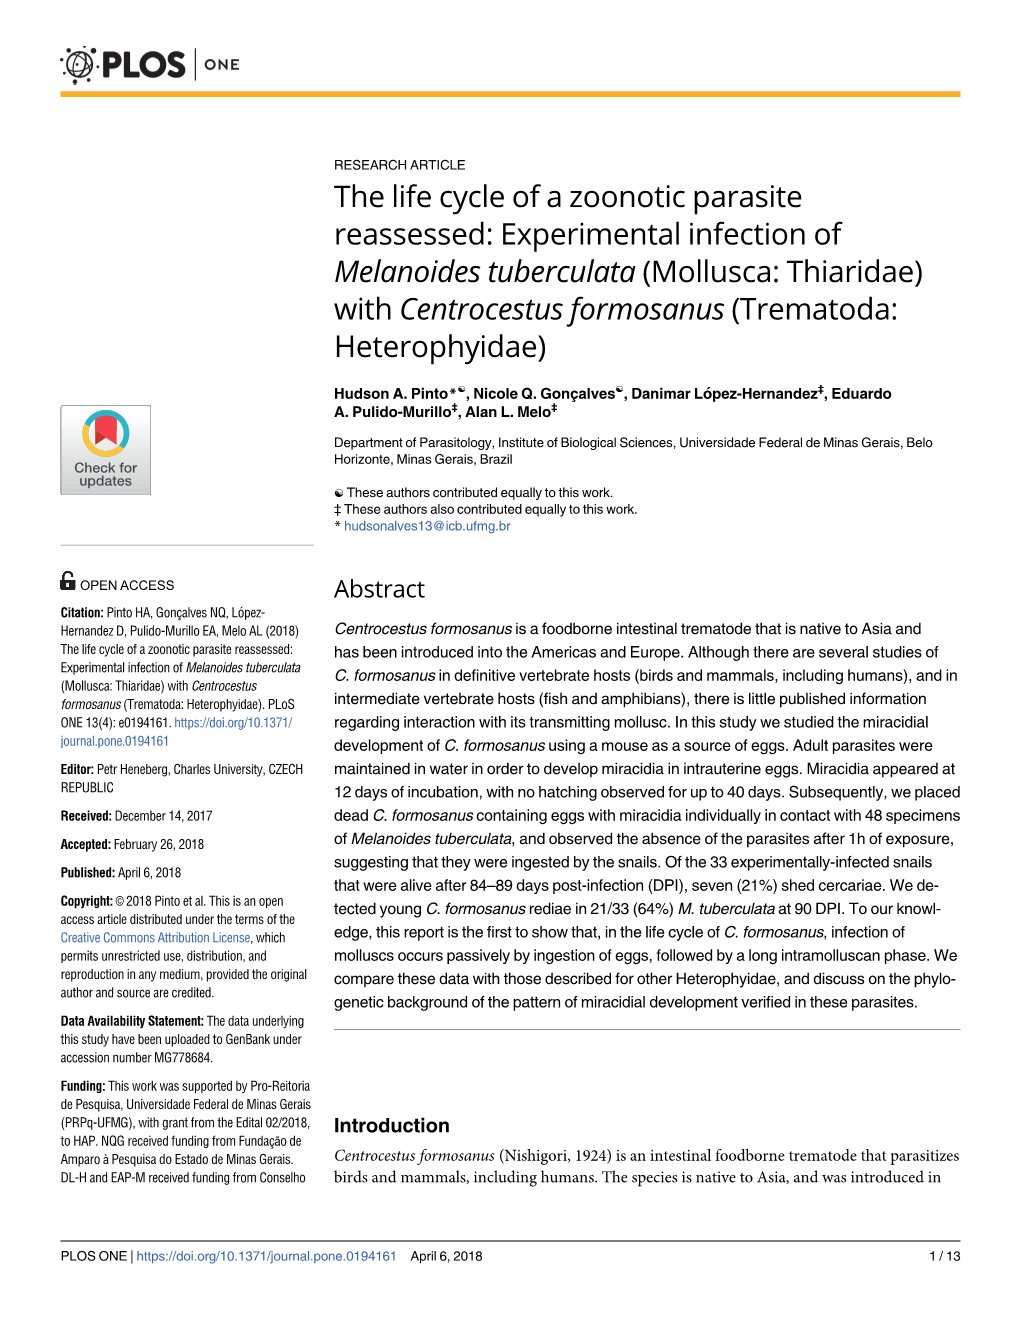 The Life Cycle of a Zoonotic Parasite Reassessed